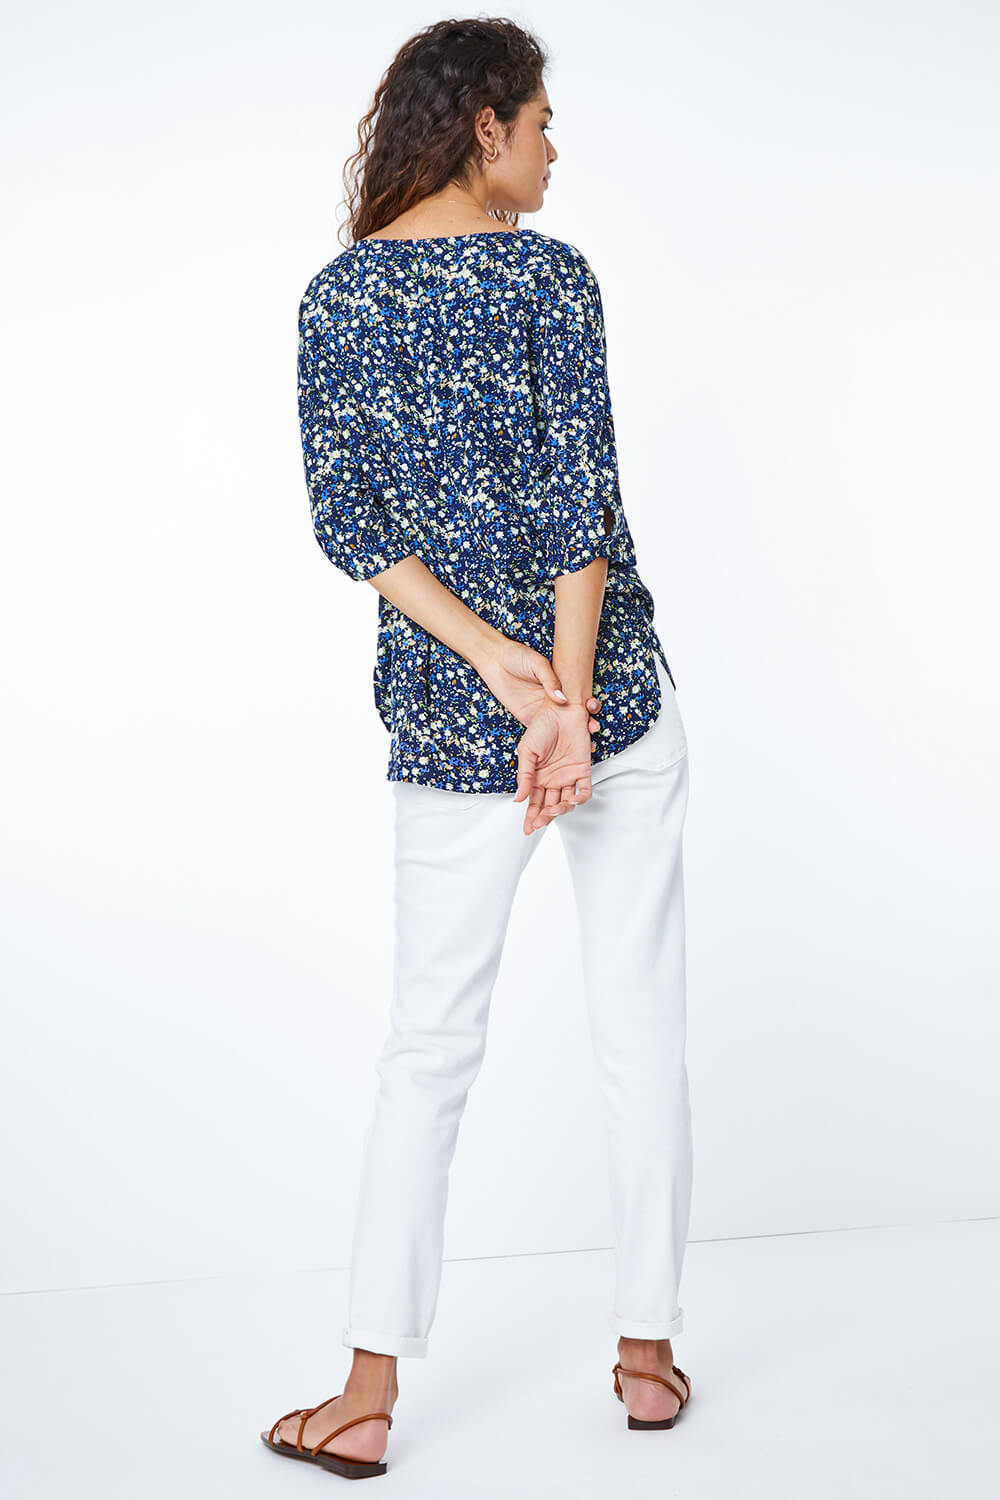 Navy  Ditsy Floral Print Tunic Top, Image 3 of 5